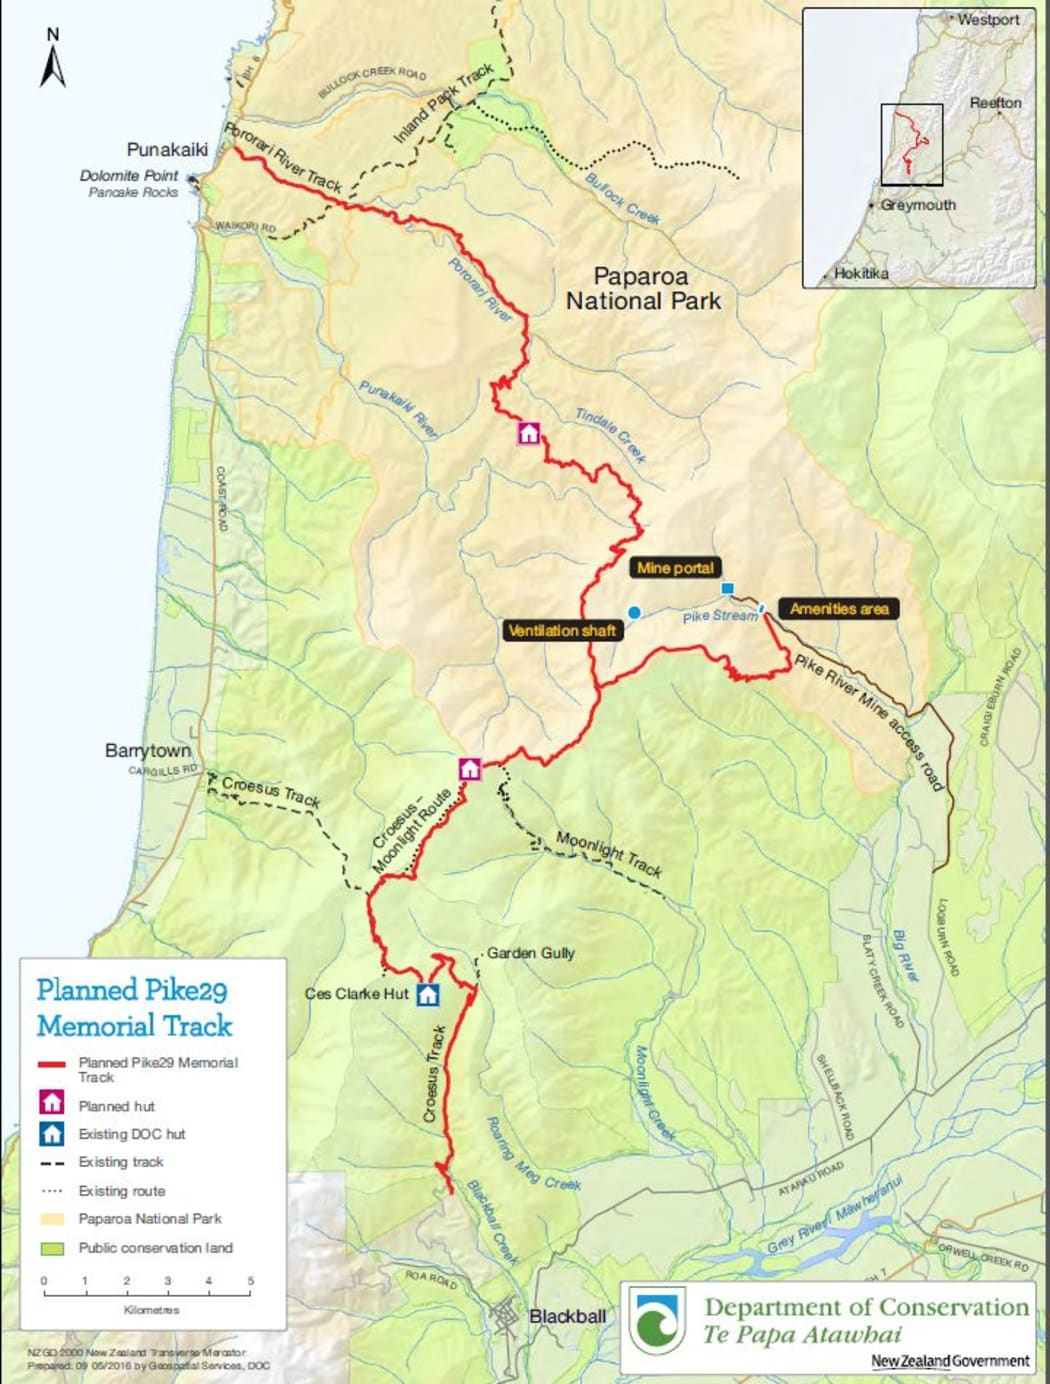 The route of the Pike29 Memorial Track